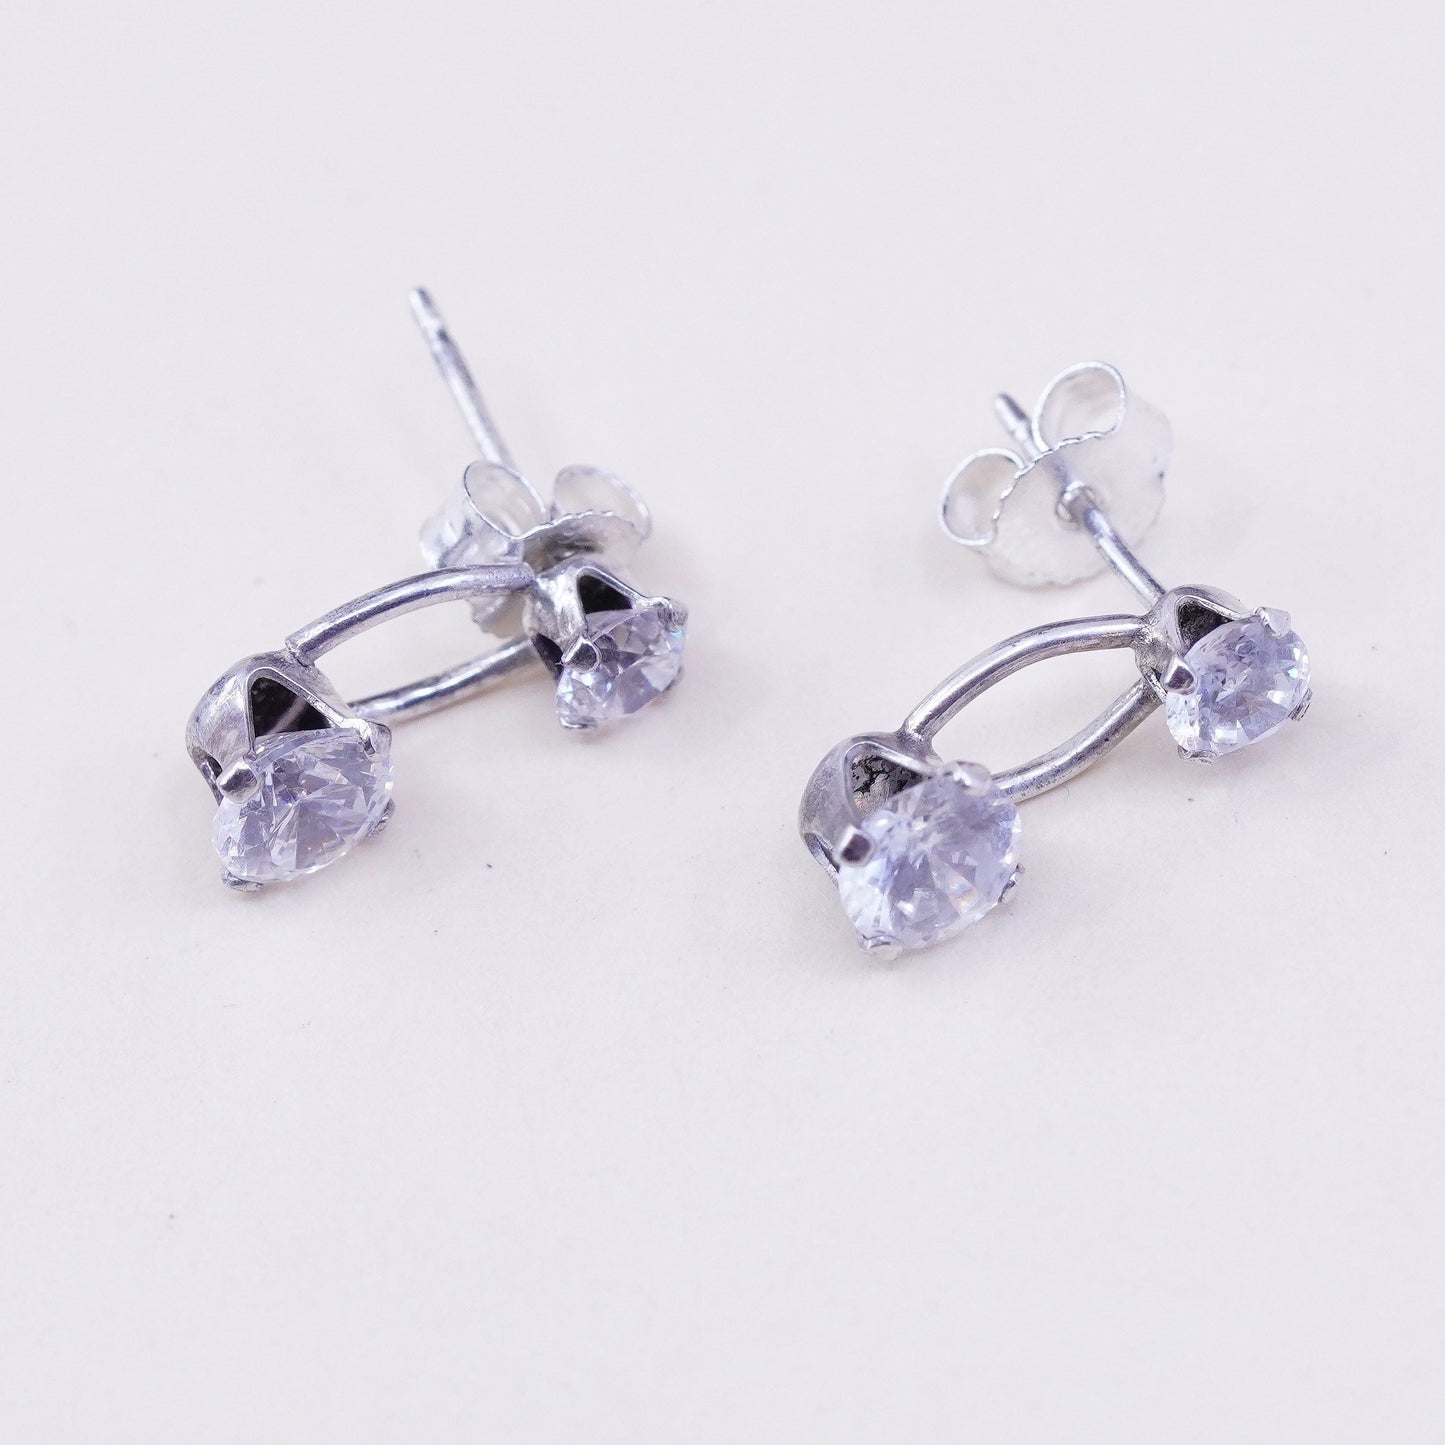 Vintage sterling 925 silver clear crystal studs, fashion minimalist earrings, stamped 925